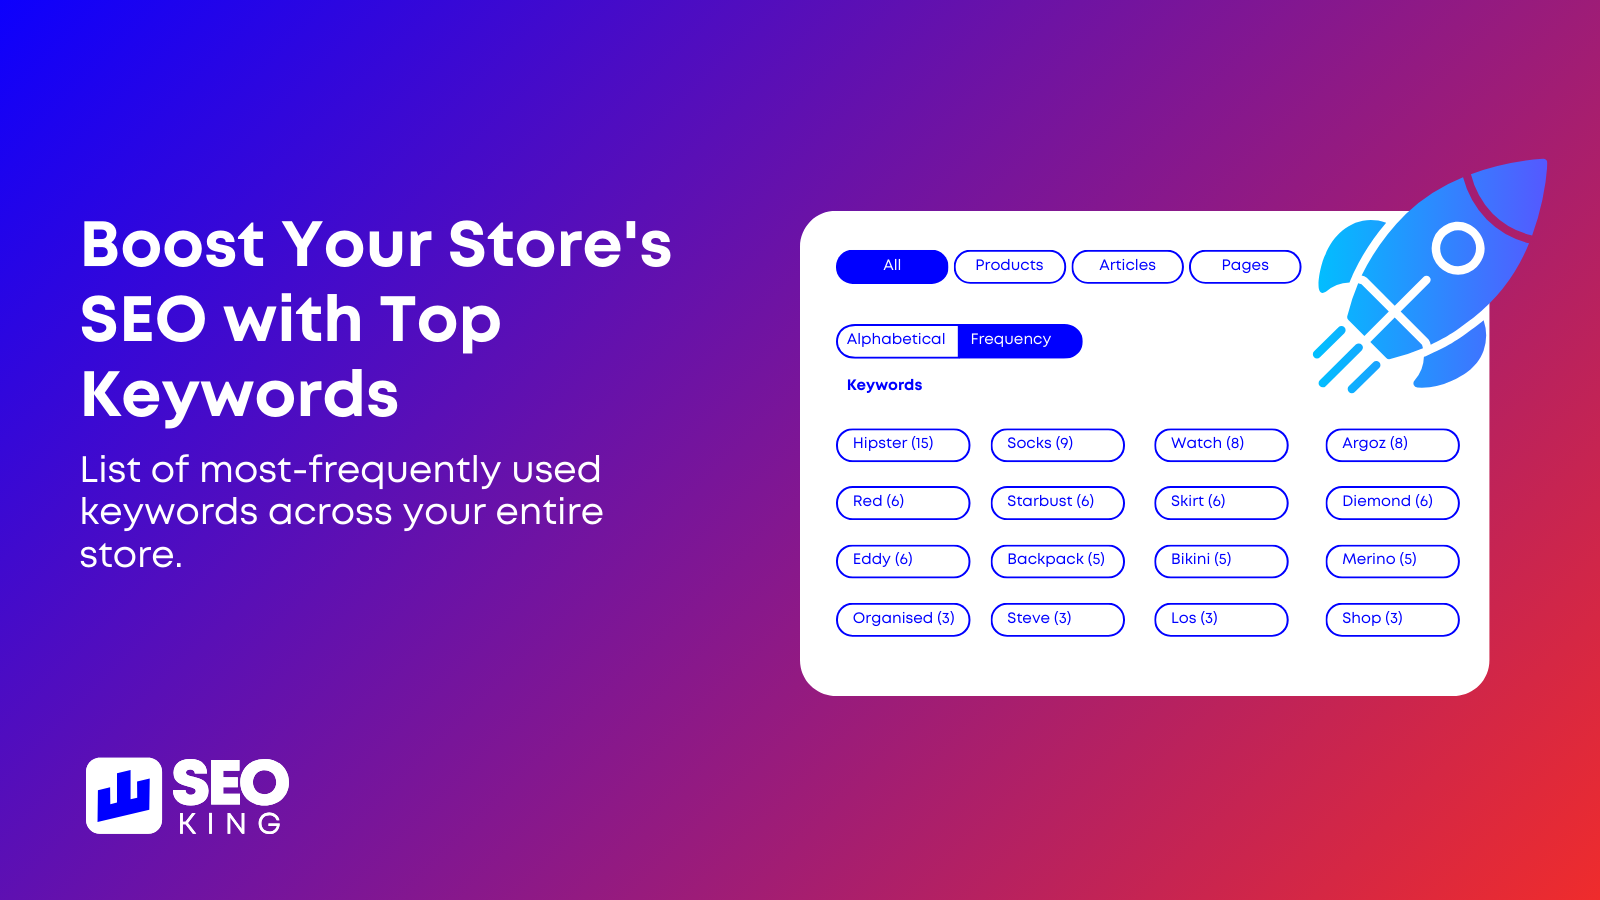 Boost Your Store's SEO with Top Keywords